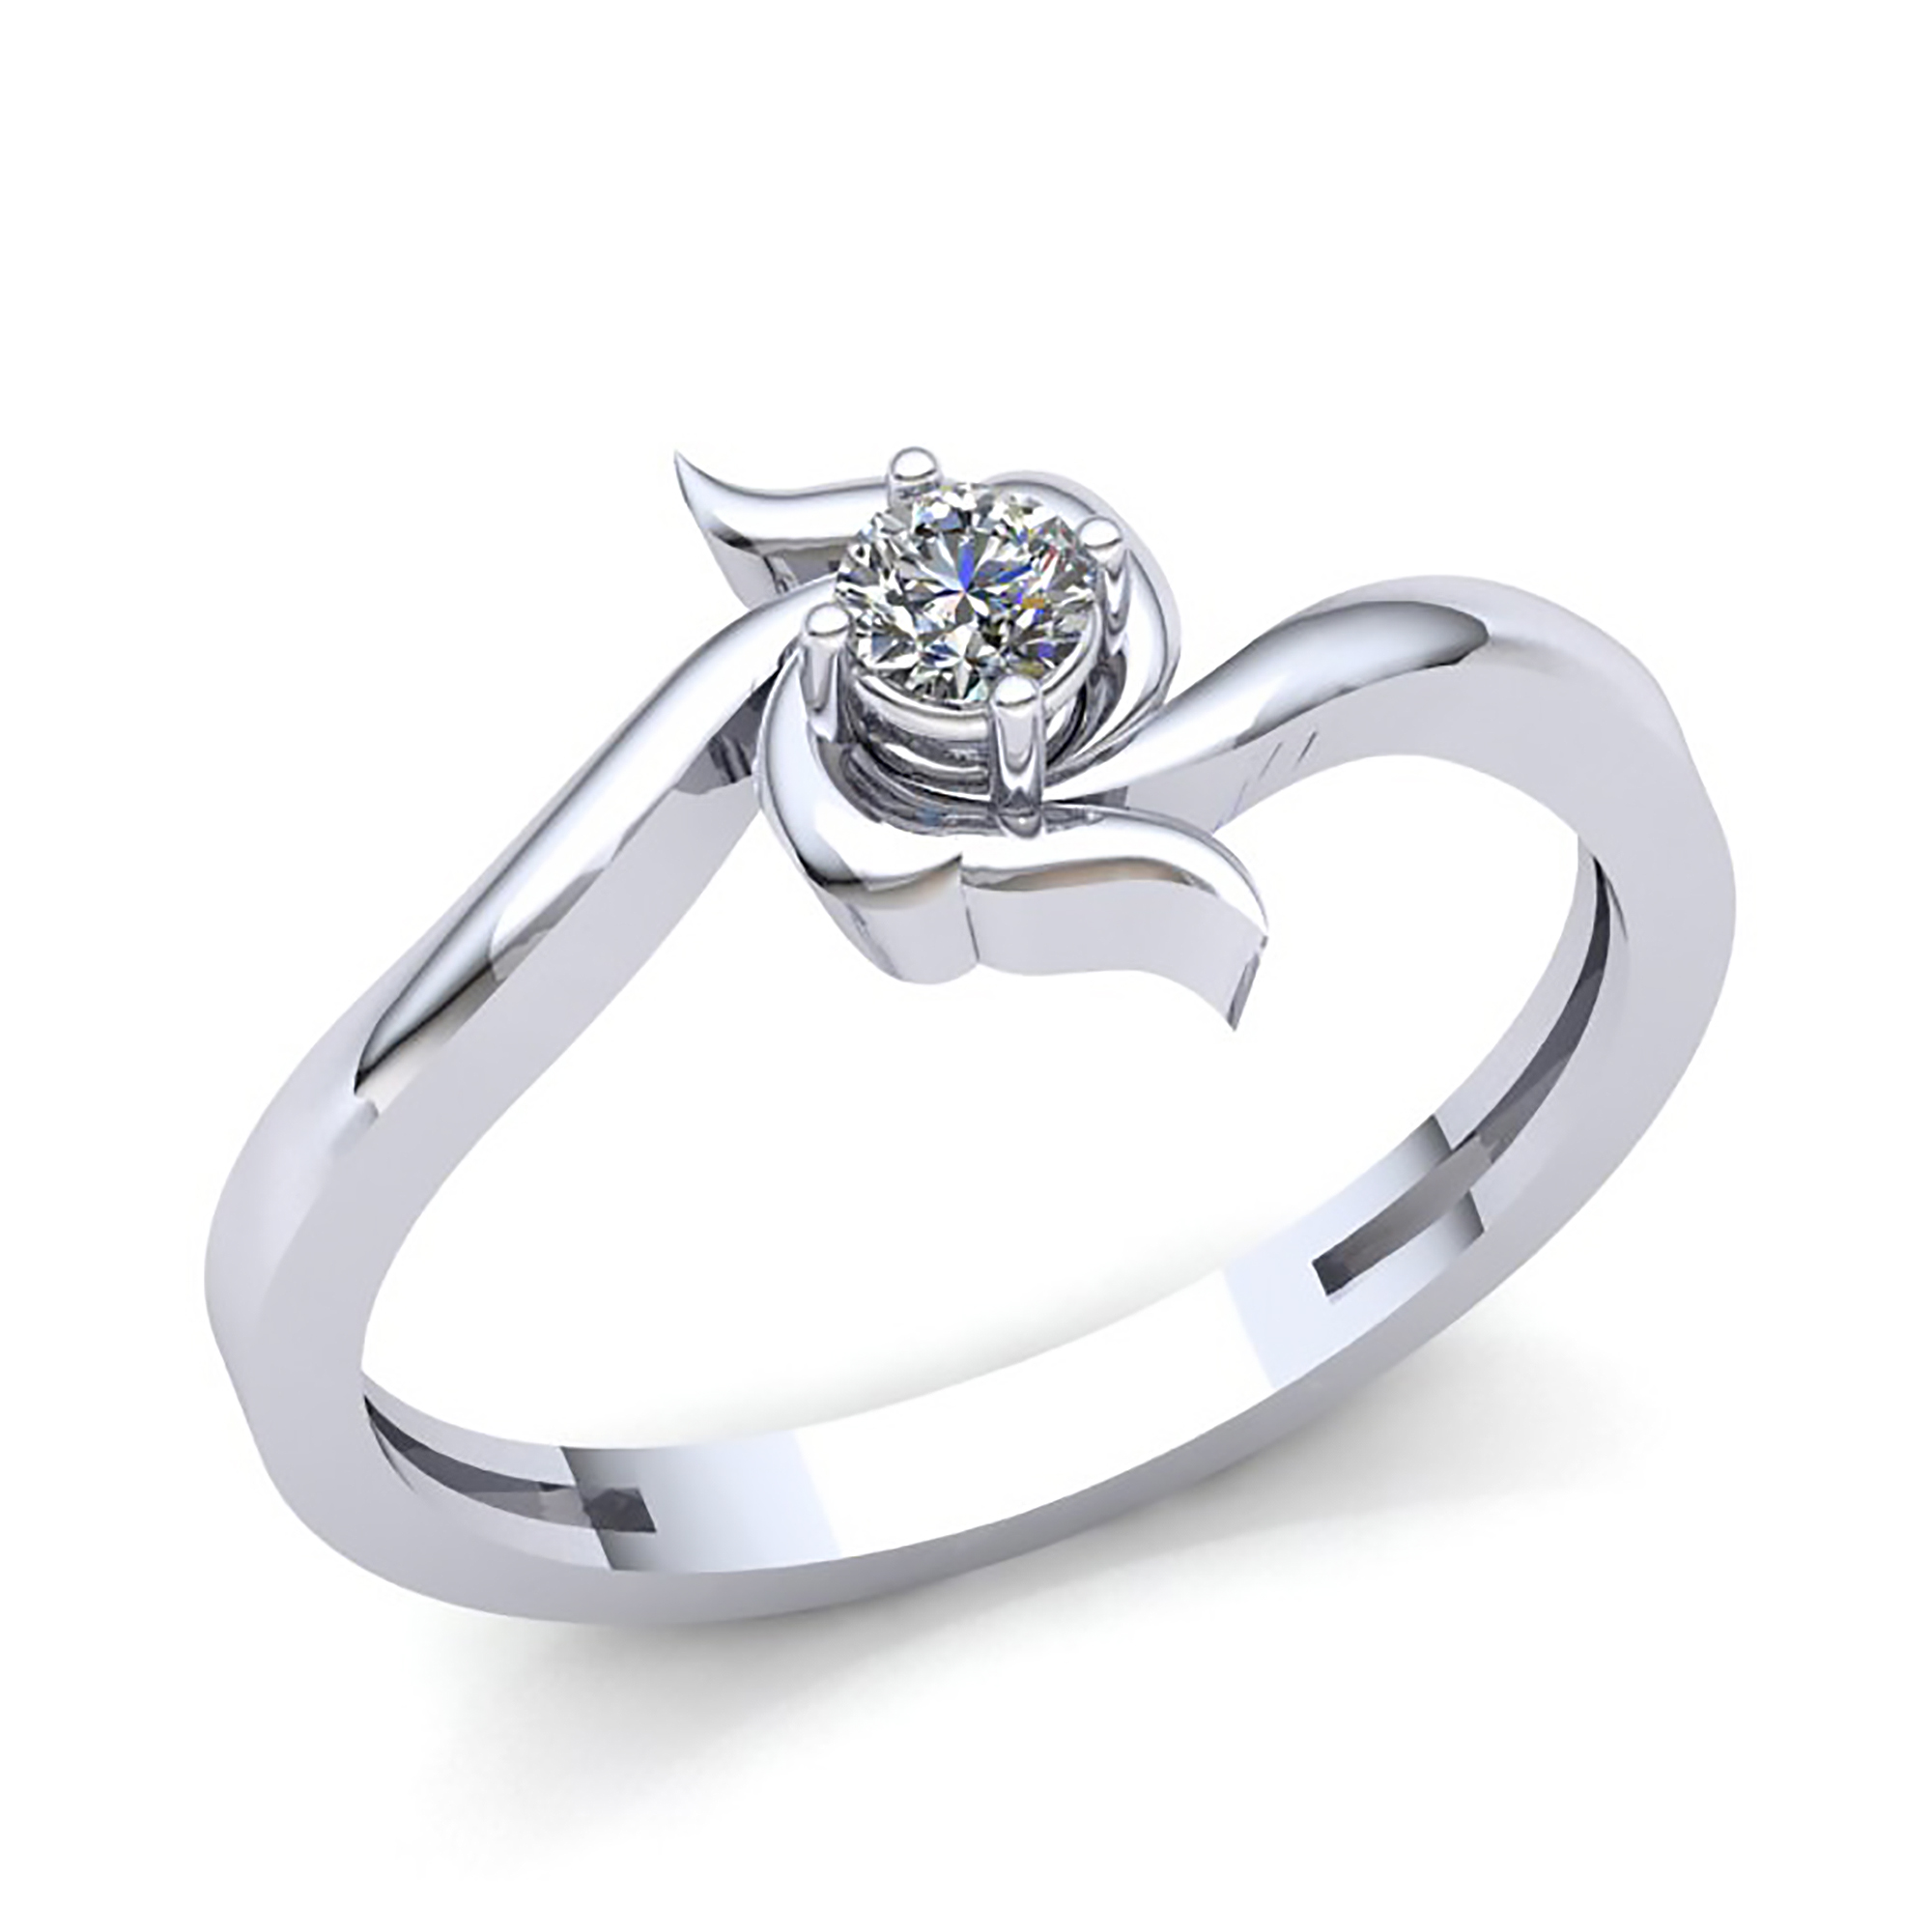 Solitaire Diamond Rings at Best Price in Jalandhar, Punjab | Bombay  Jewellers